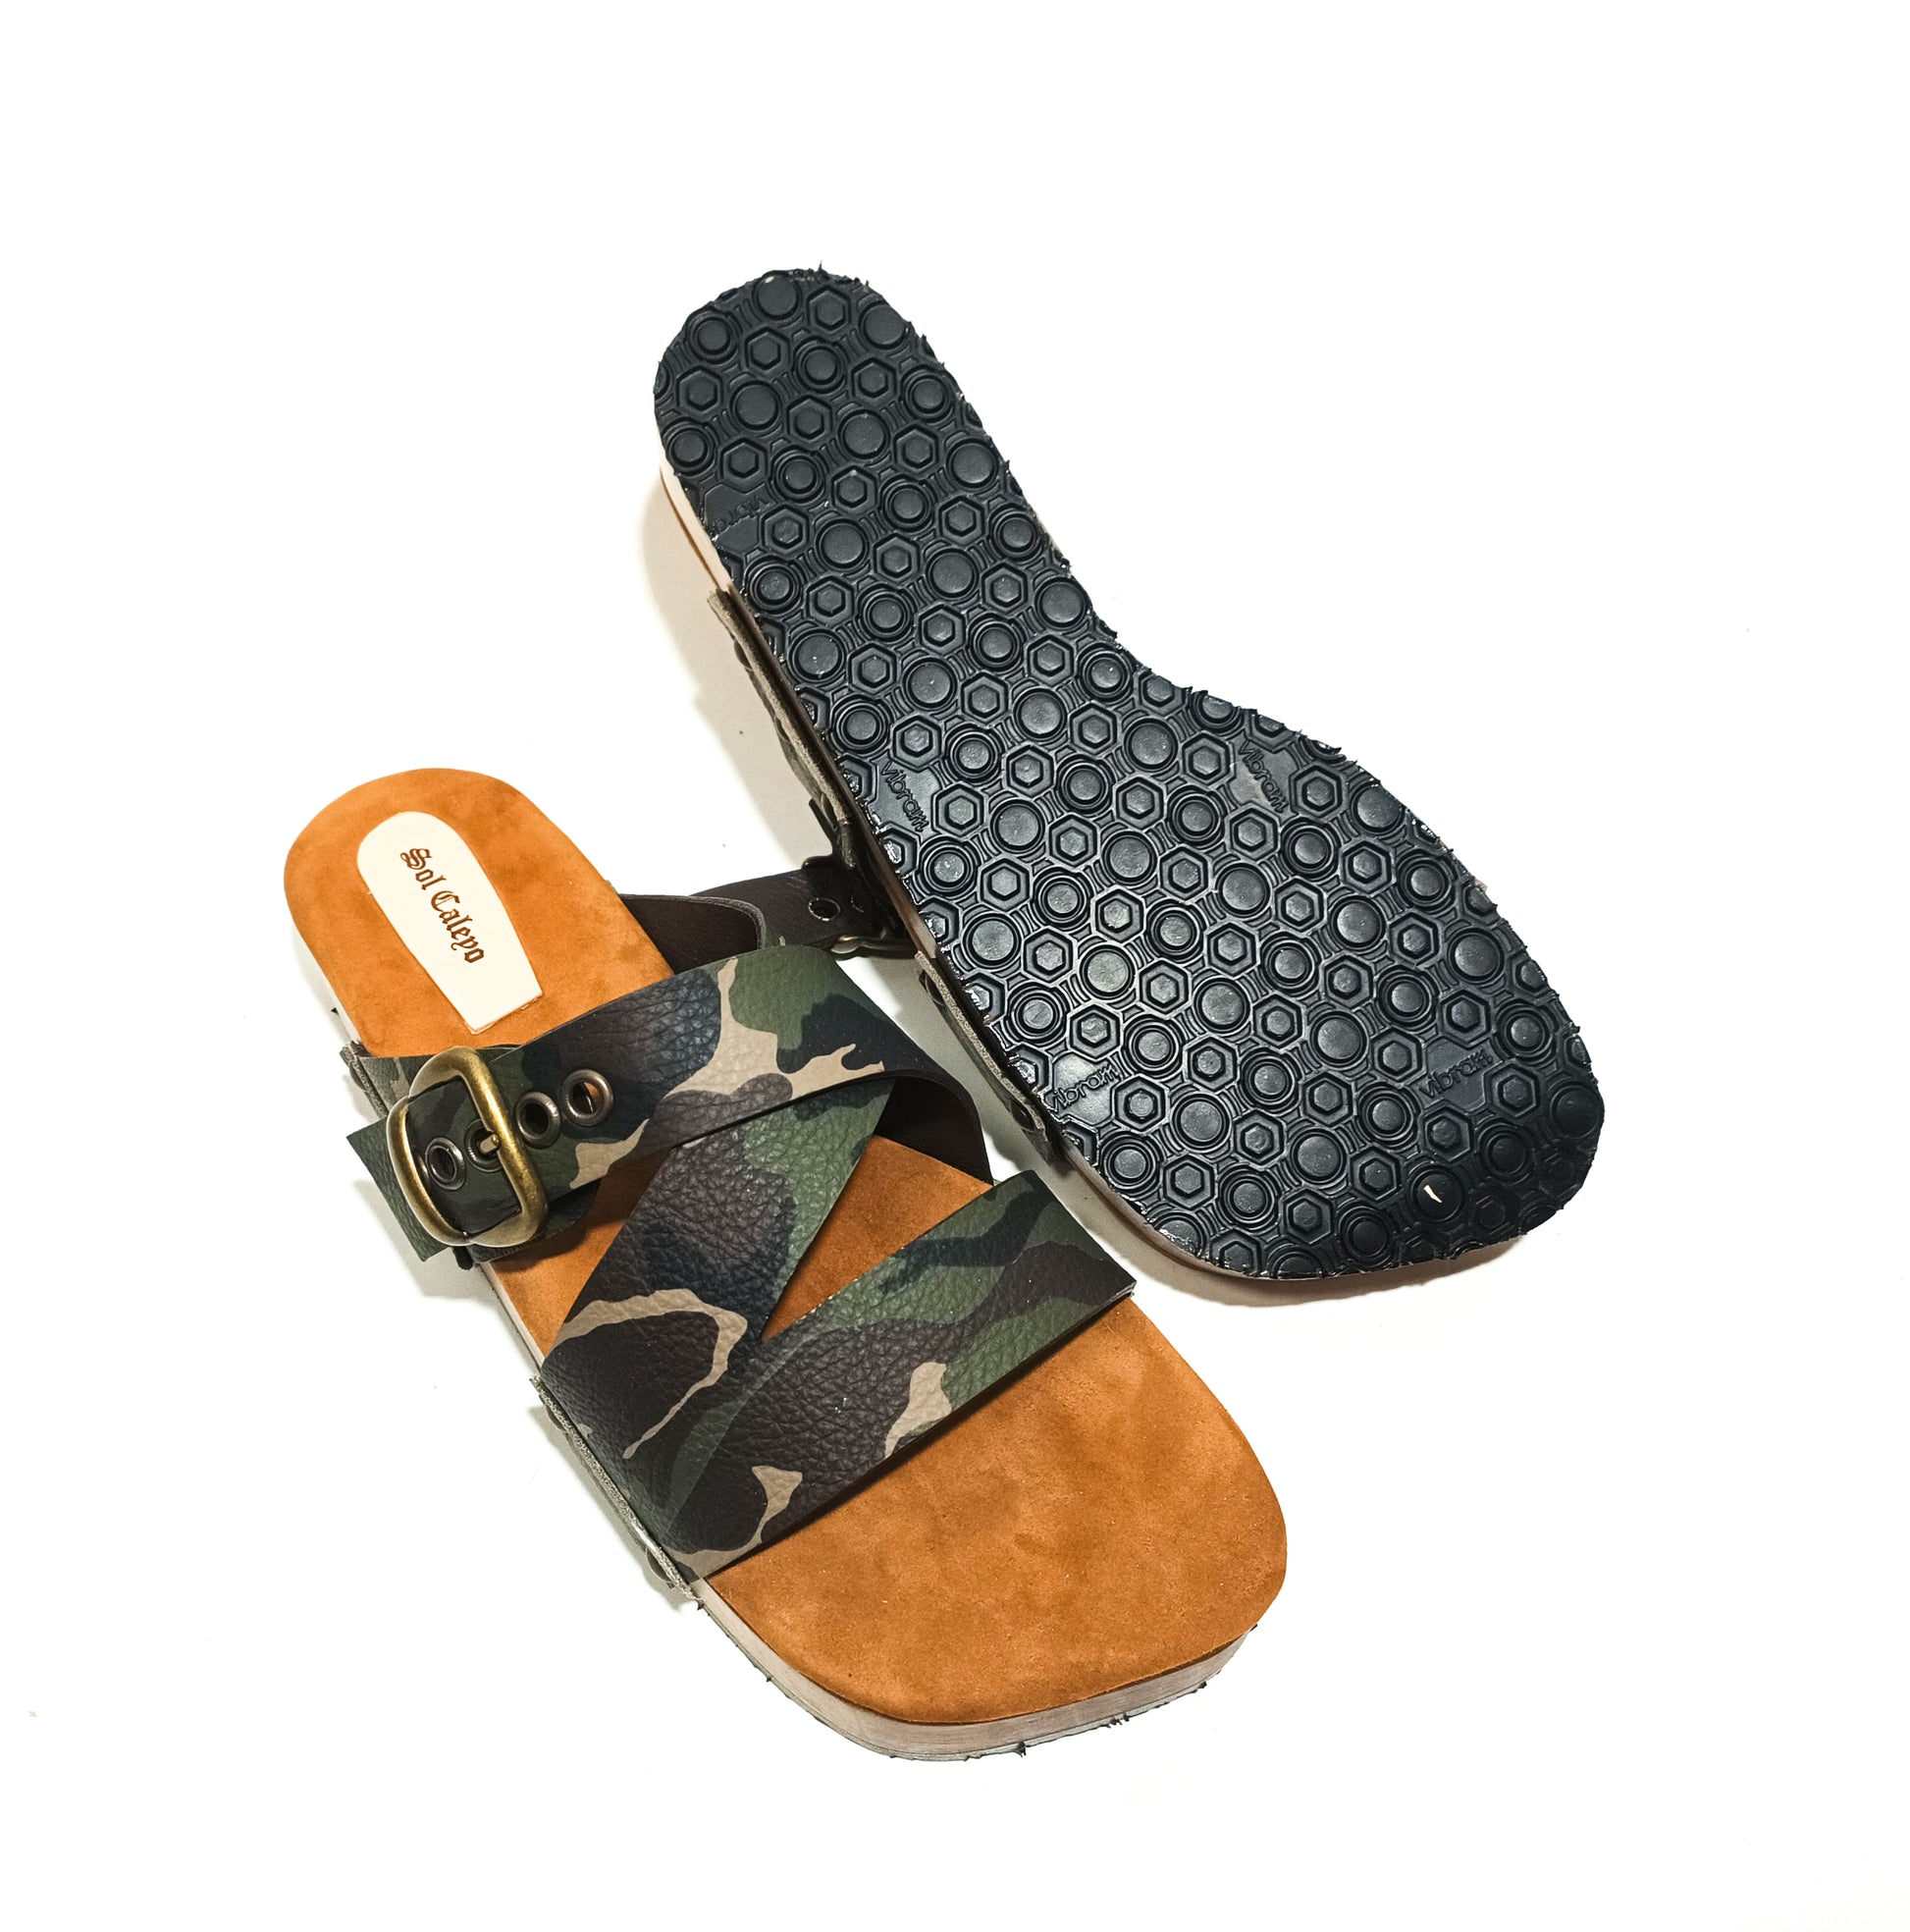 Clog sandals for men in military style. Men's leather sandals made in genuine leather. Clog sandals for men with a unique style. Military sandals is an exclusive design by Sol Caleyo.